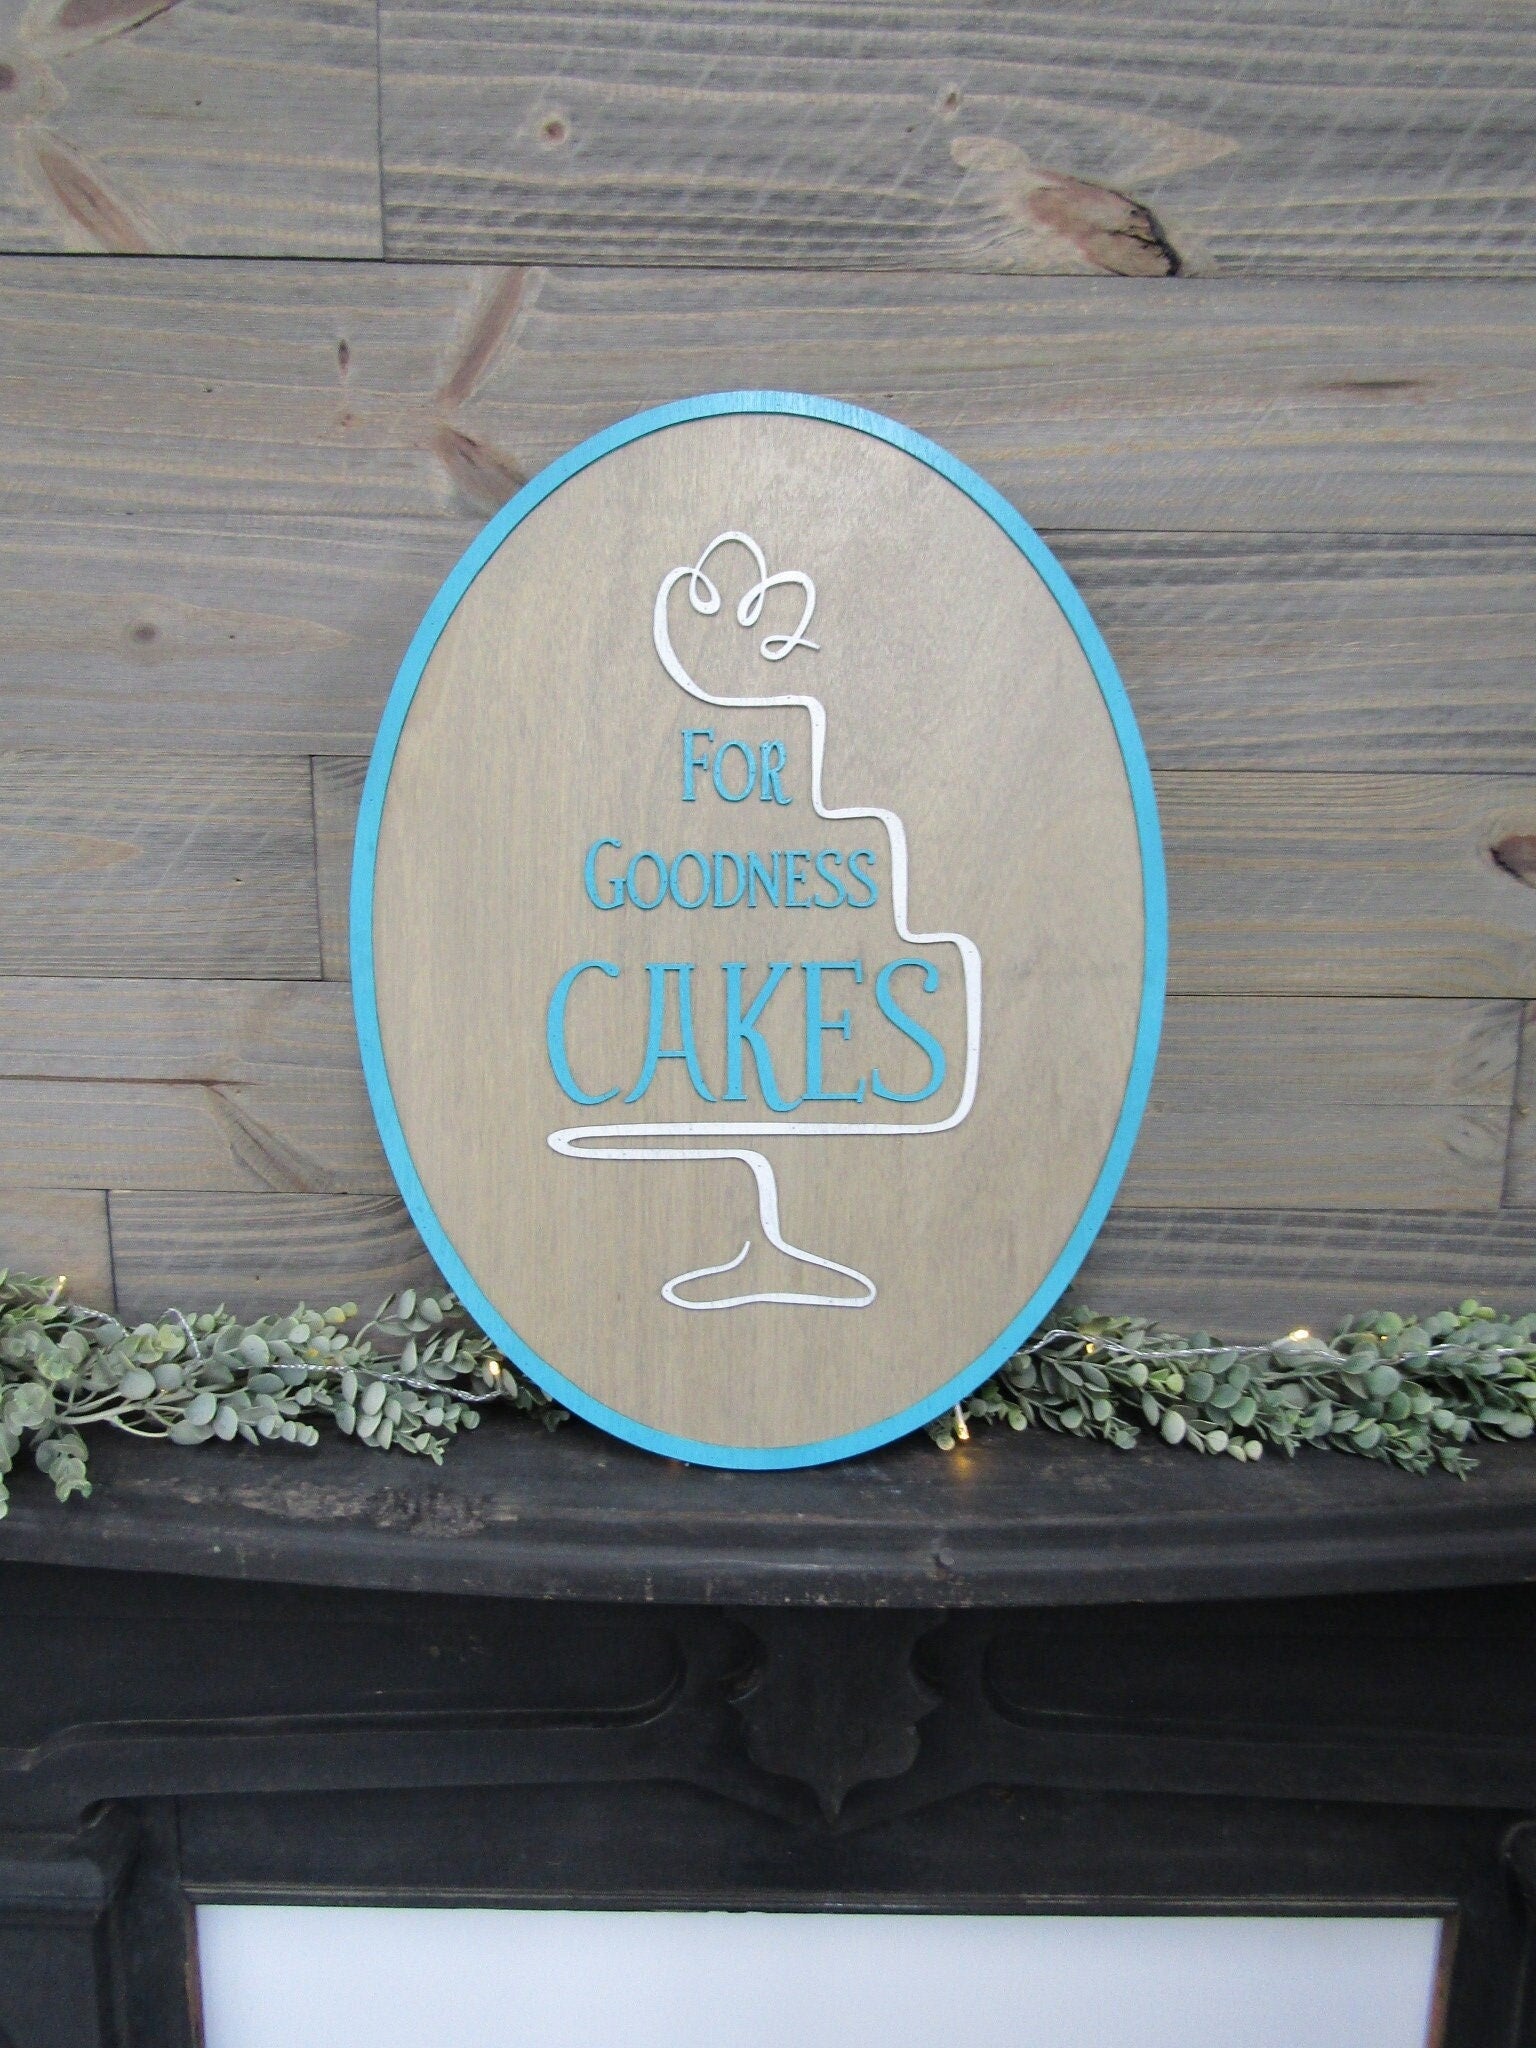 Custom Commerical Signage Bakery Baker Cake Sign Raised Text 3D Oval Sign Oversized Made to Order Handmade Business Sign Your Actual Logo